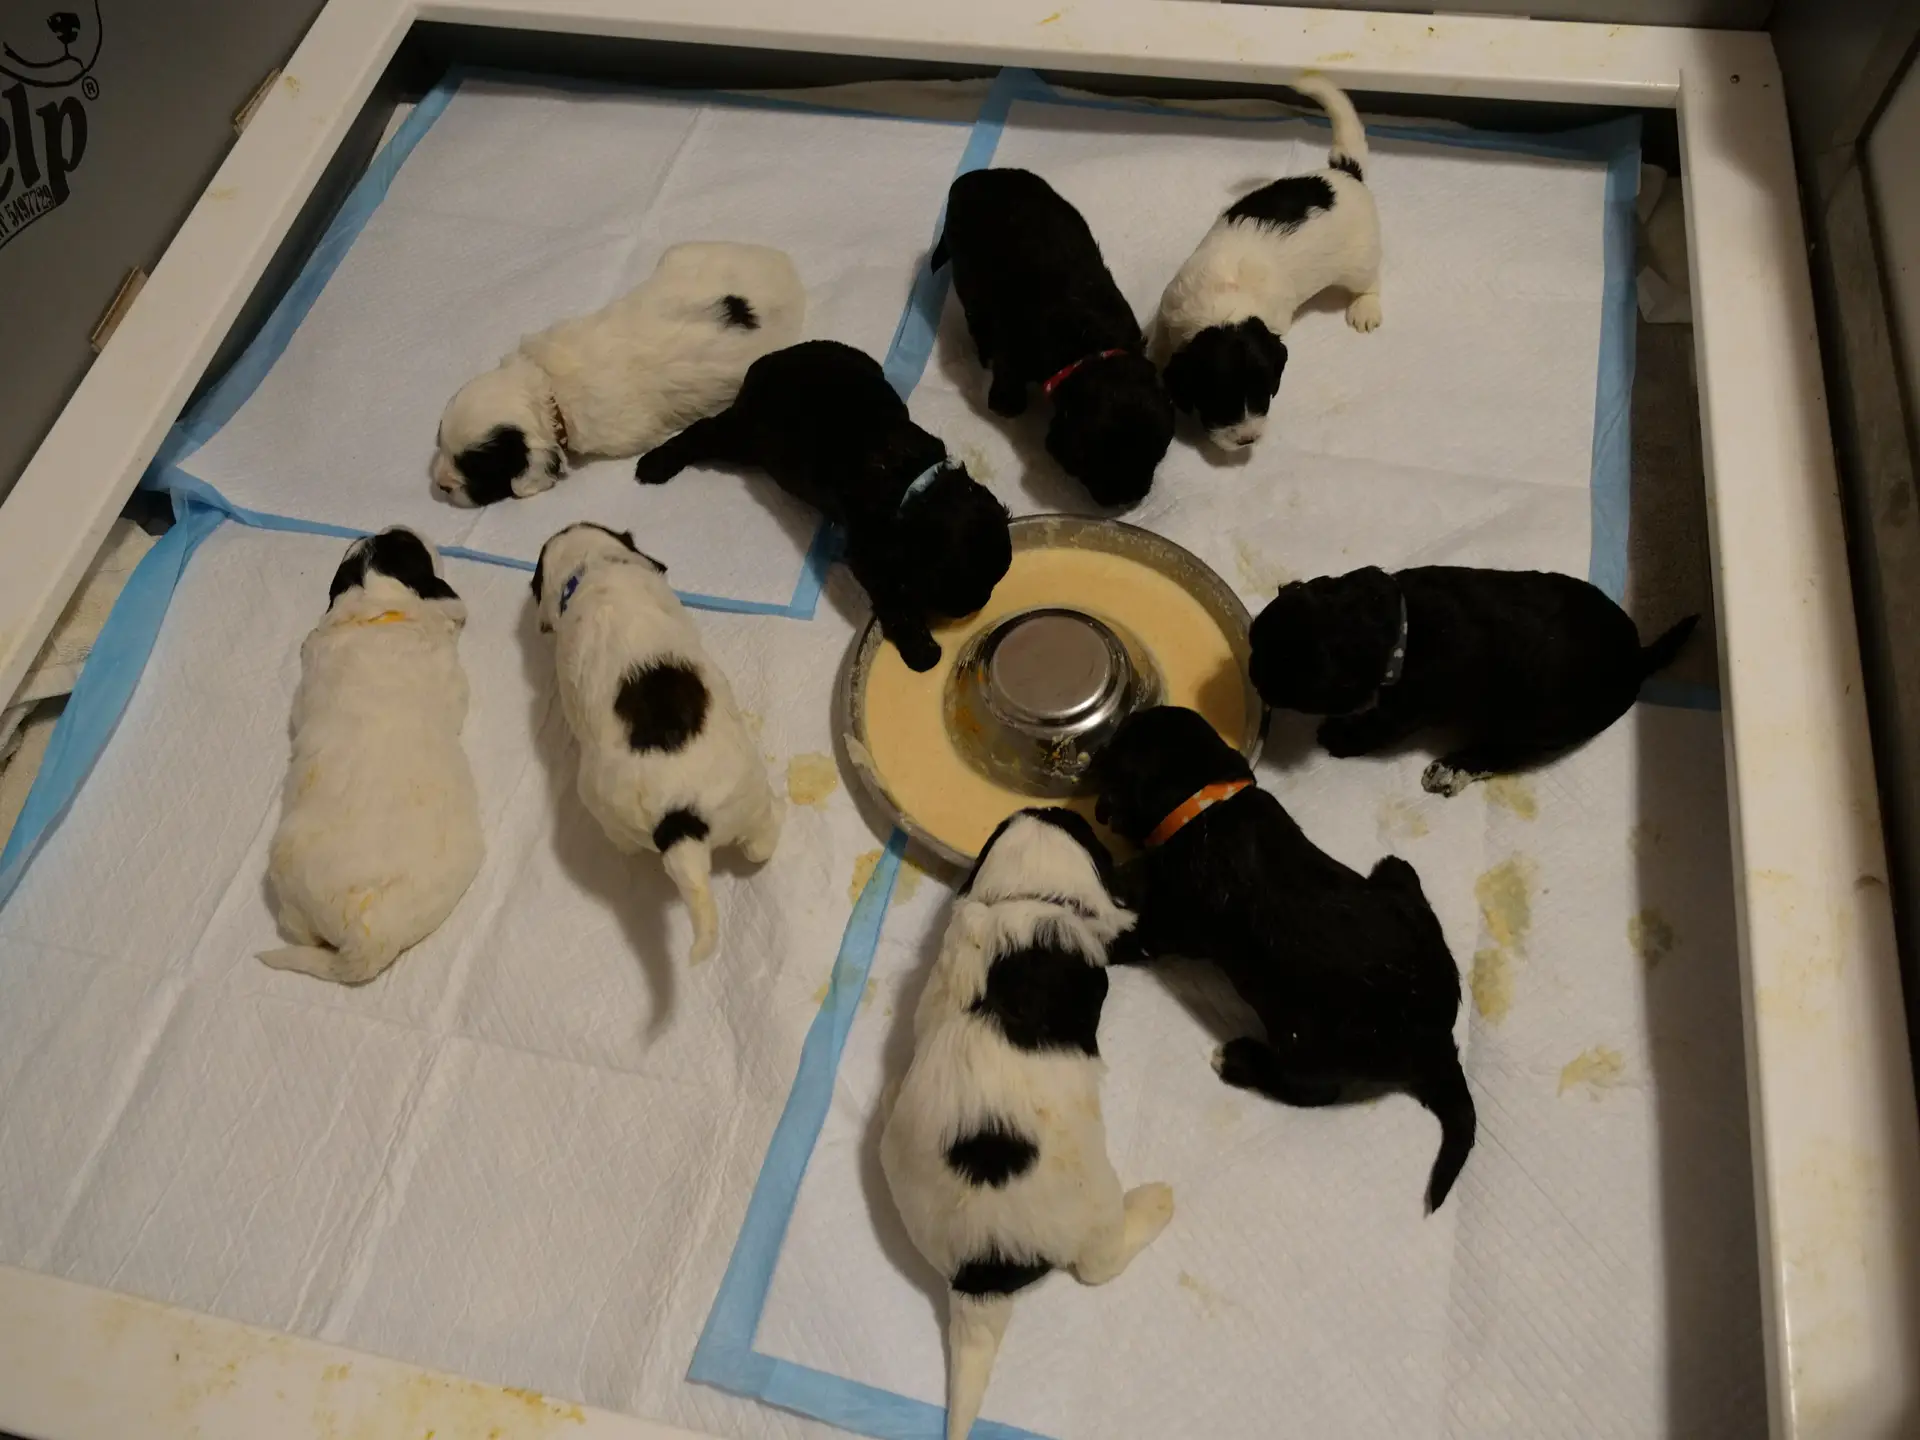 3-week old labradoodle puppies. Birds eye view, 4 solid black and 5 black and white. They are eating out of a round pan full of orange soft food.